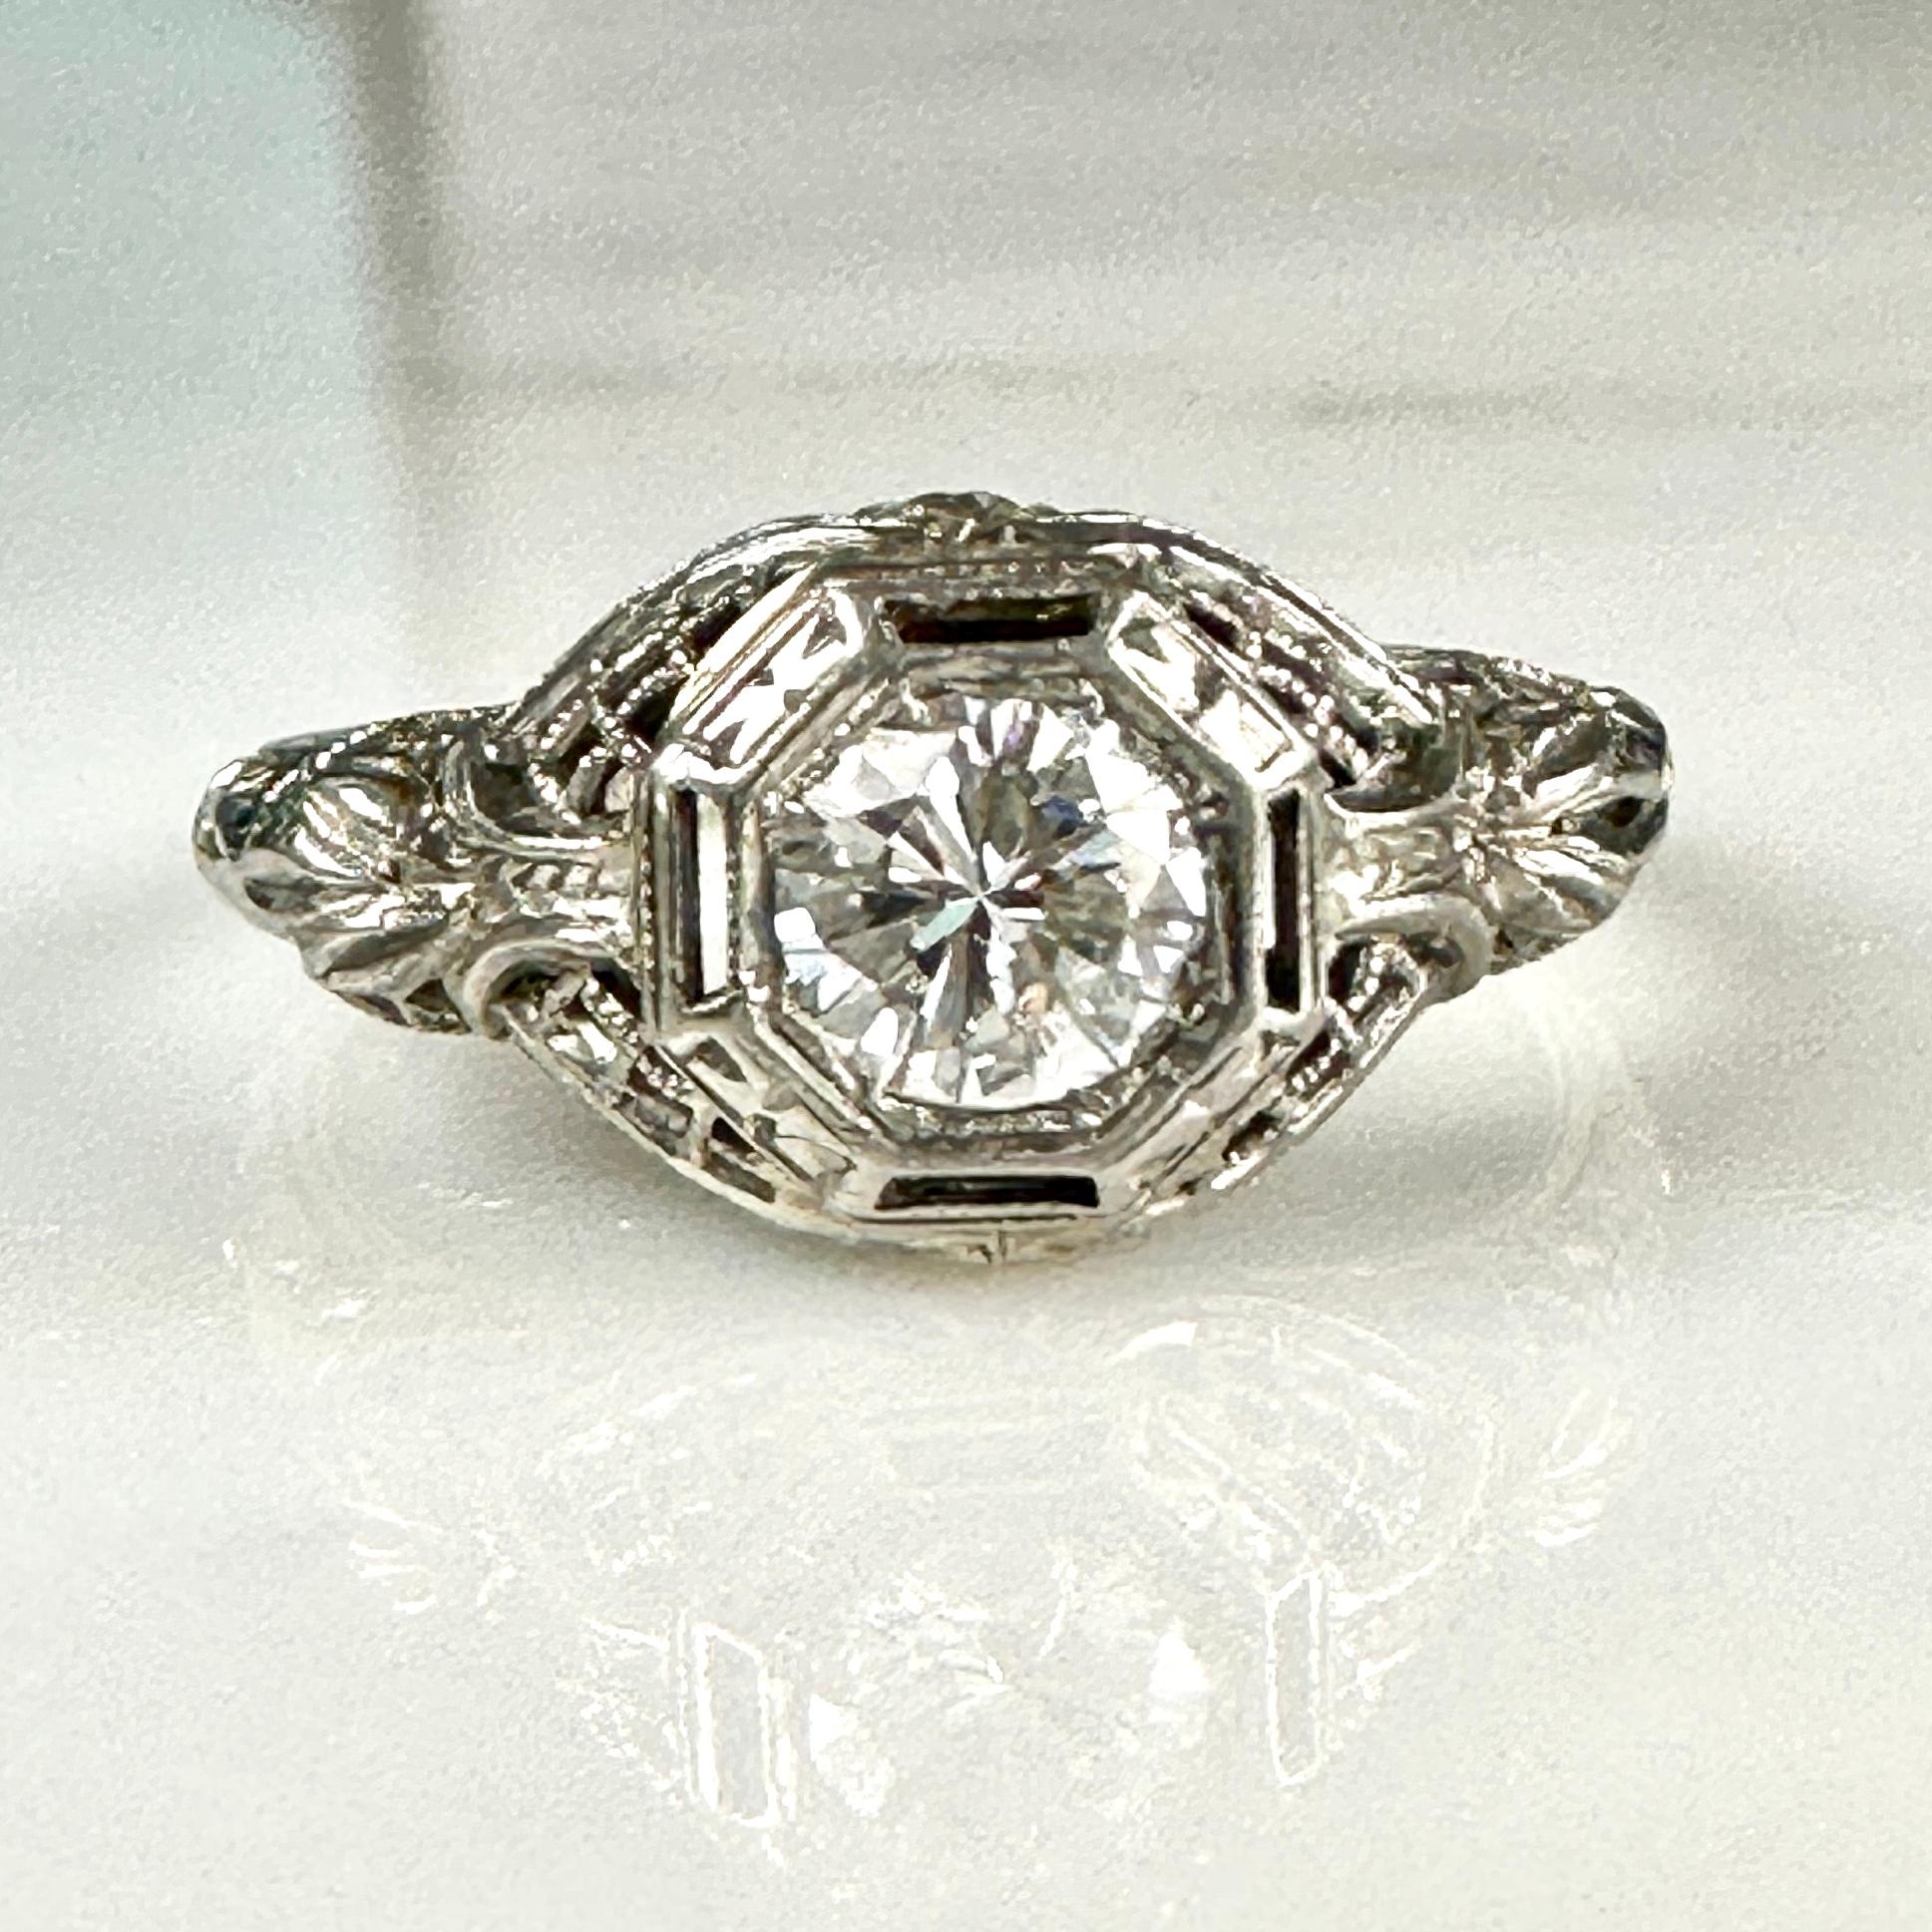 Details:
Beautiful delicate Edwardian 18K white gold filigree & diamond ring—would make a lovely wedding ring! The diamond is .50ct, and is set in a very detailed lacy filigree. The filigree is in amazing condition. The ring has a sweet engraving